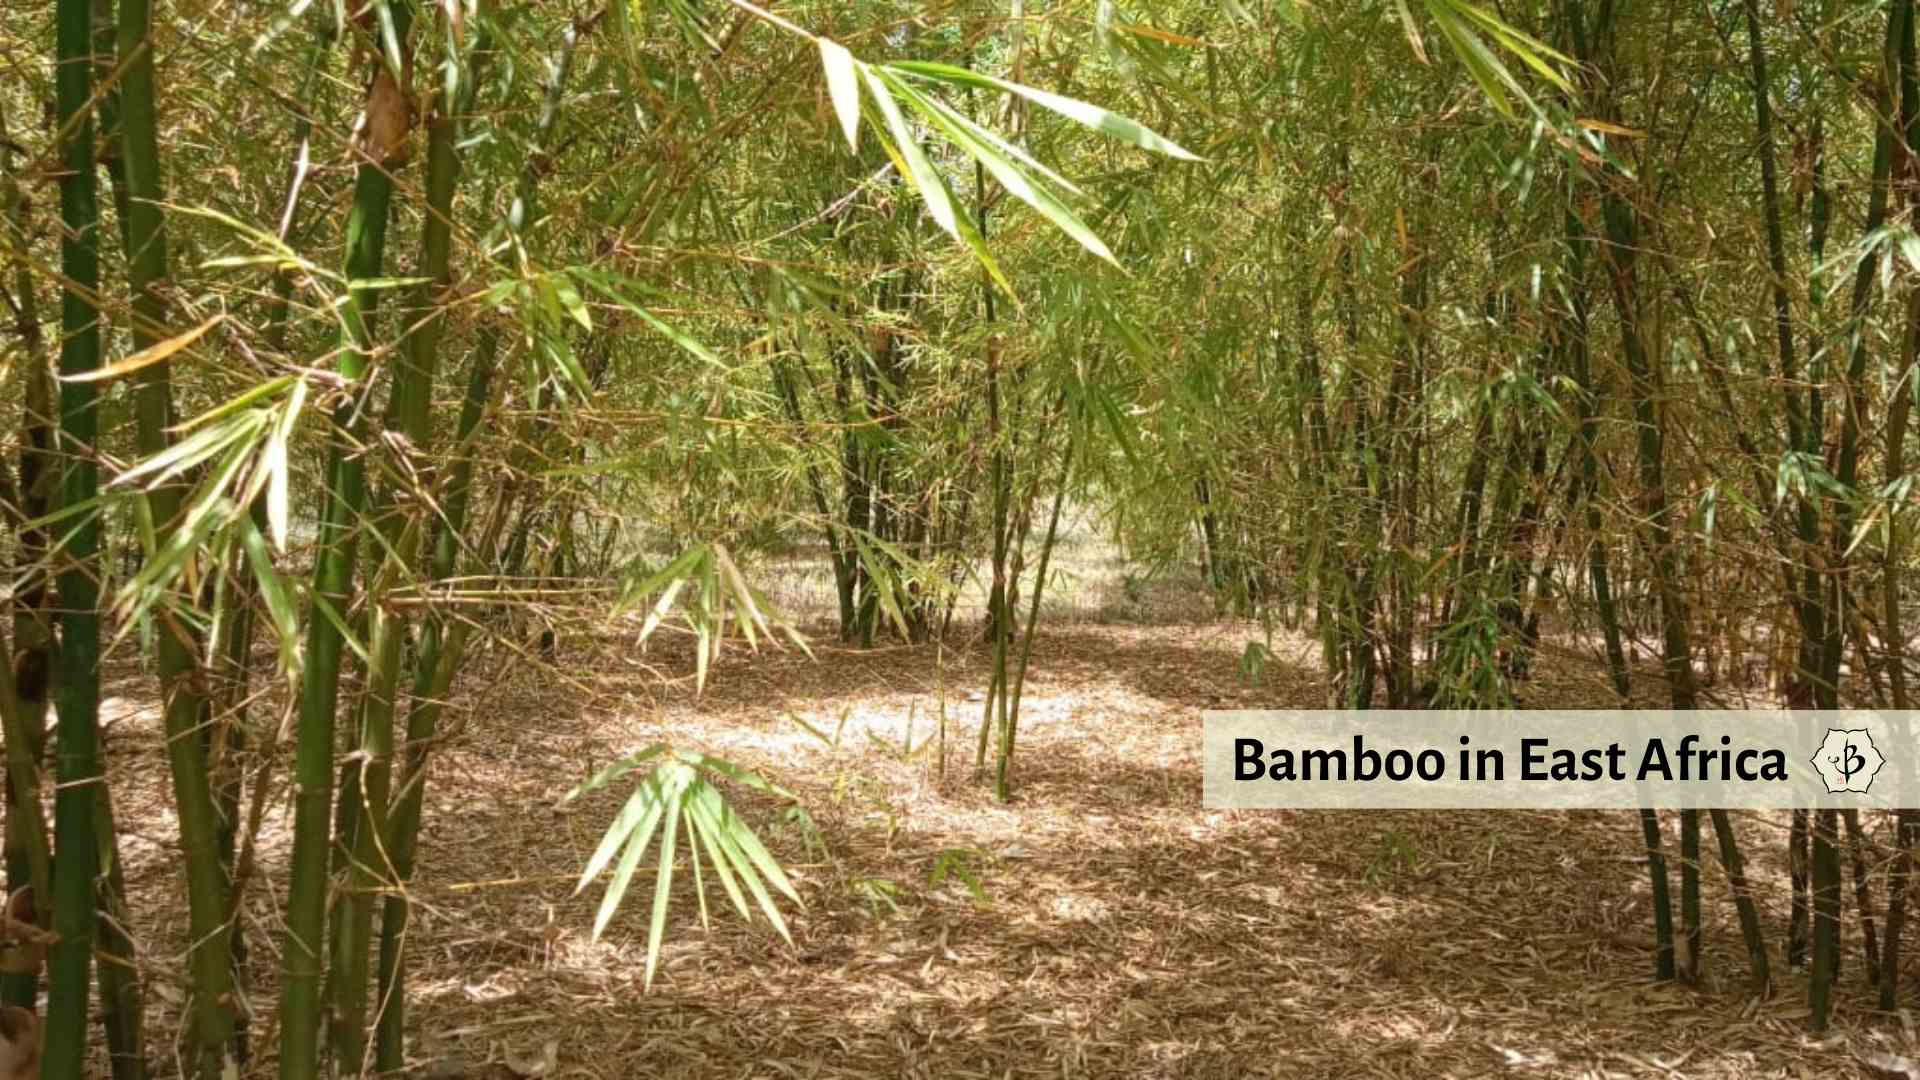 Bamboo in East Africa